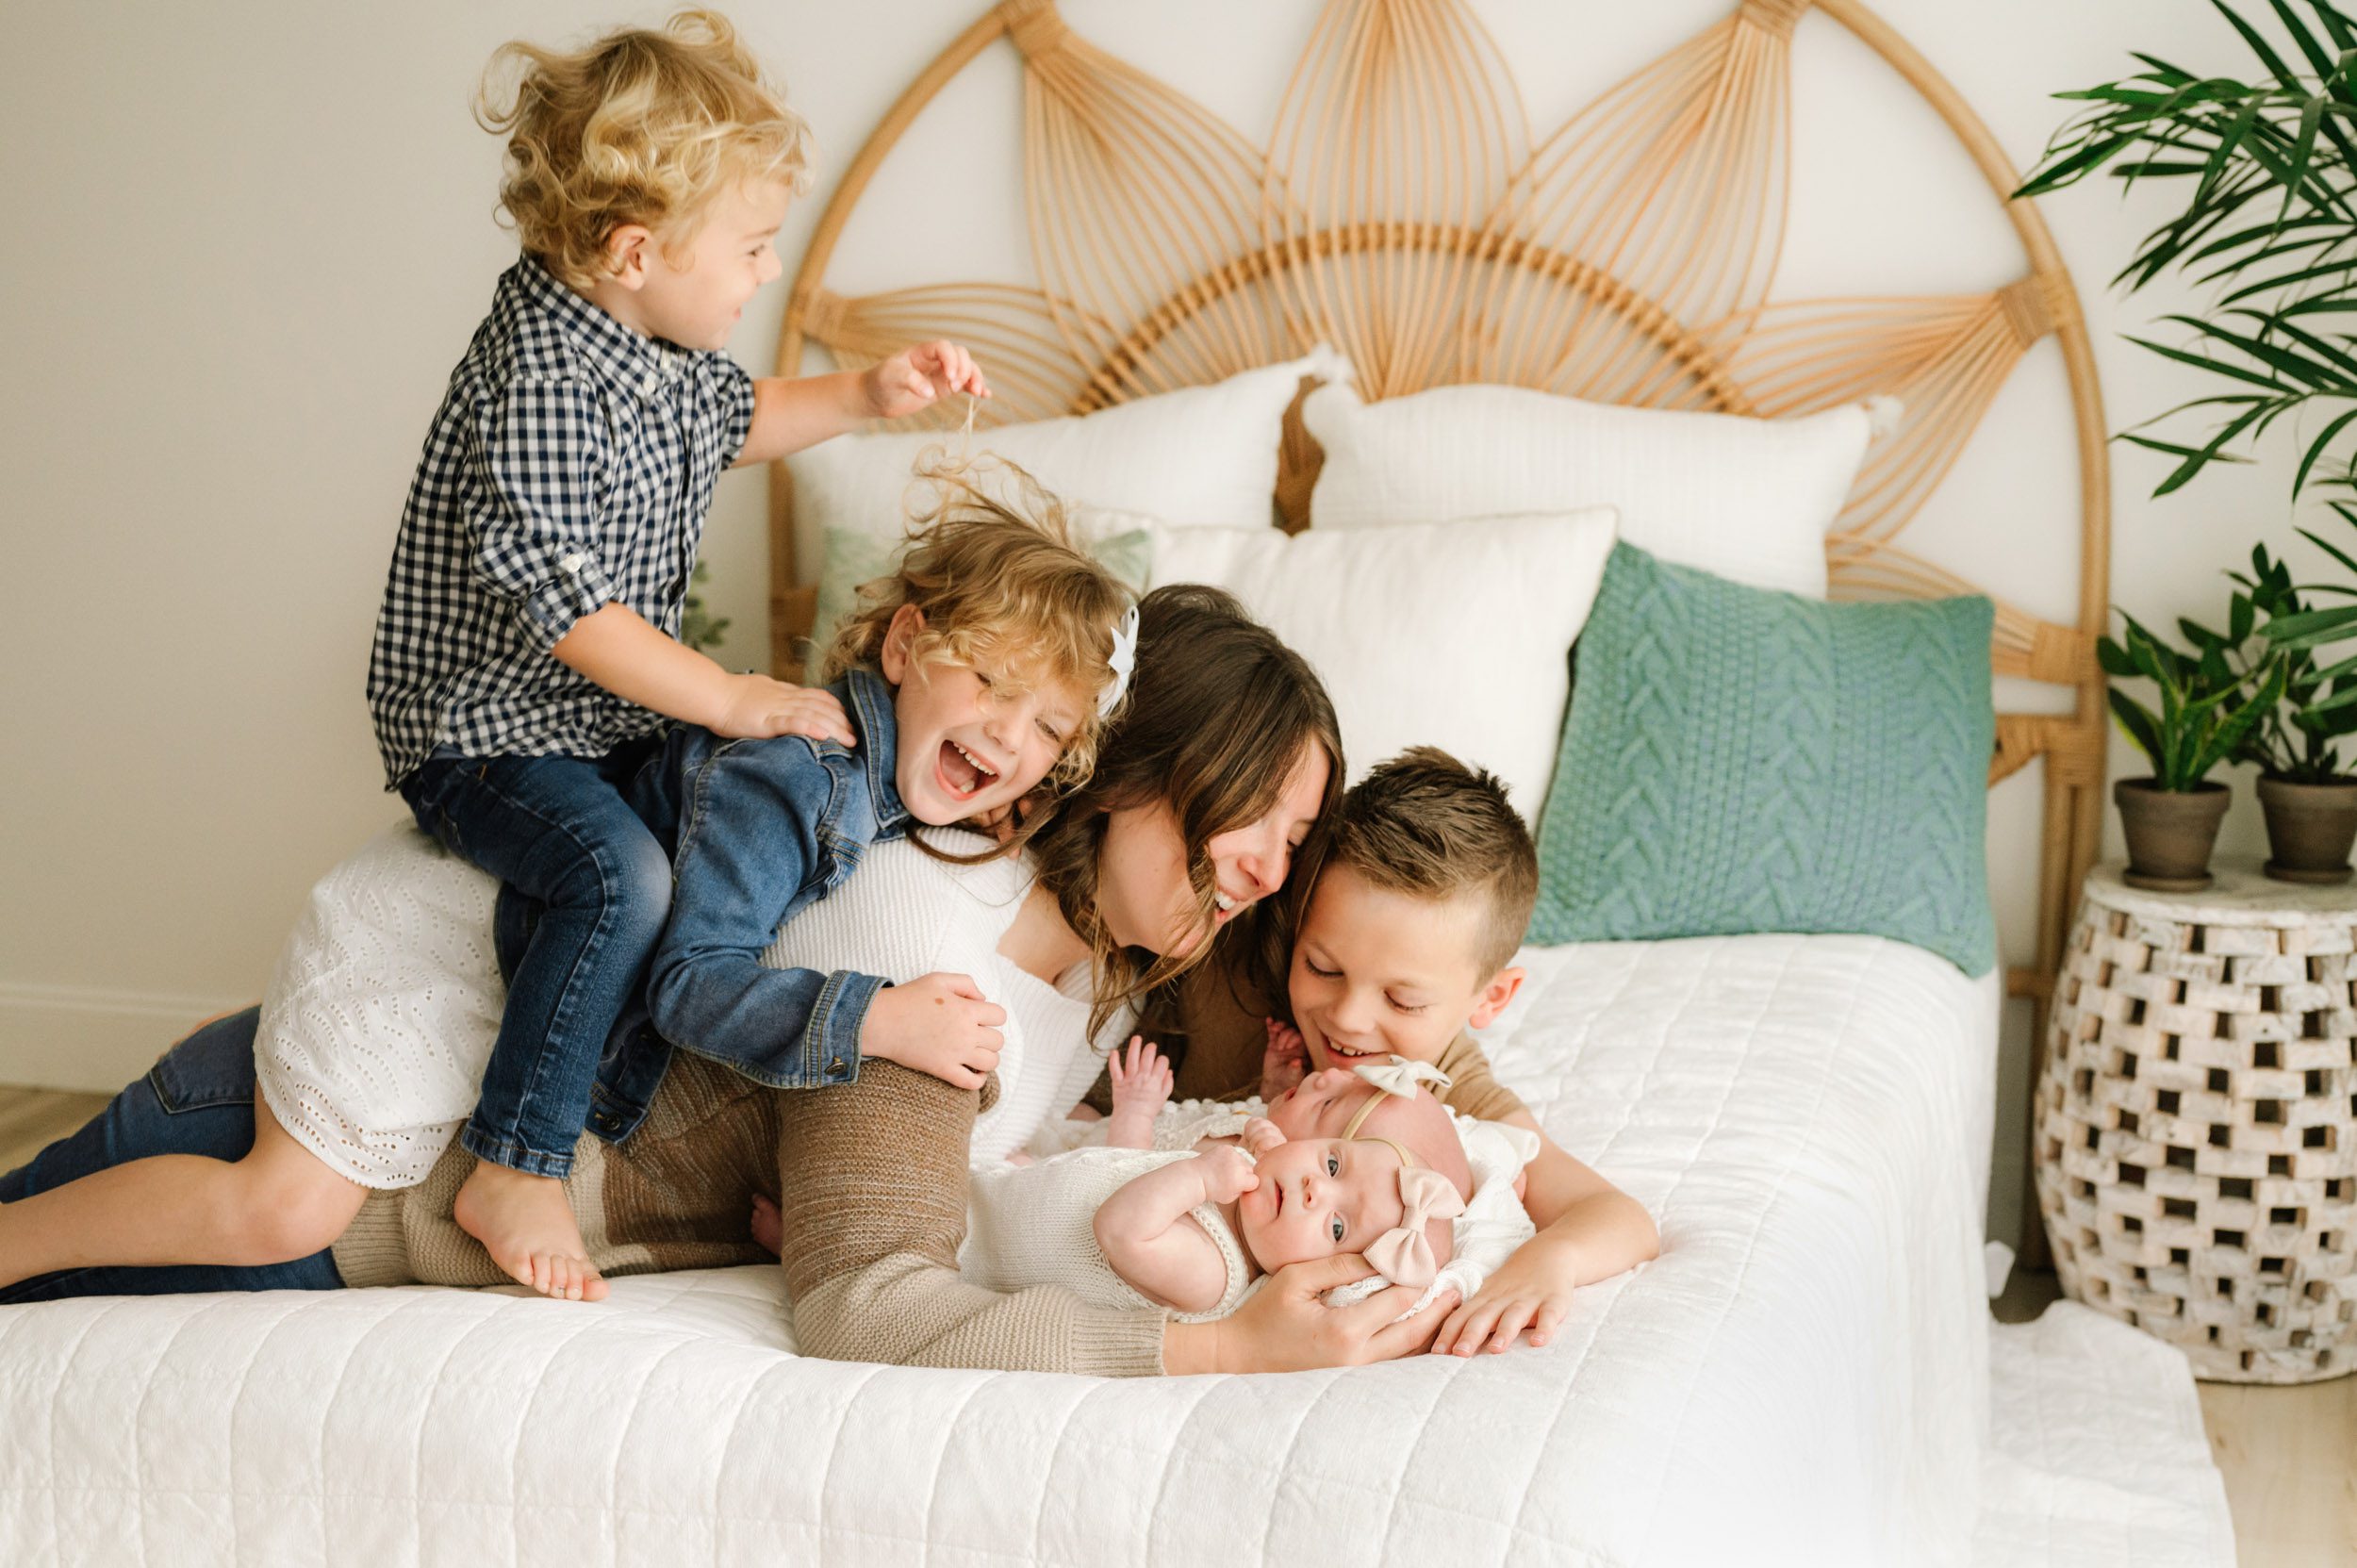 a mom laying on a bed with her twin baby girls as her oldest son lays next to her, her daughter lays on her back, and her youngest son sits on his sister's back and jumps up and down while they all laugh during a lifestyle newborn photoshoot